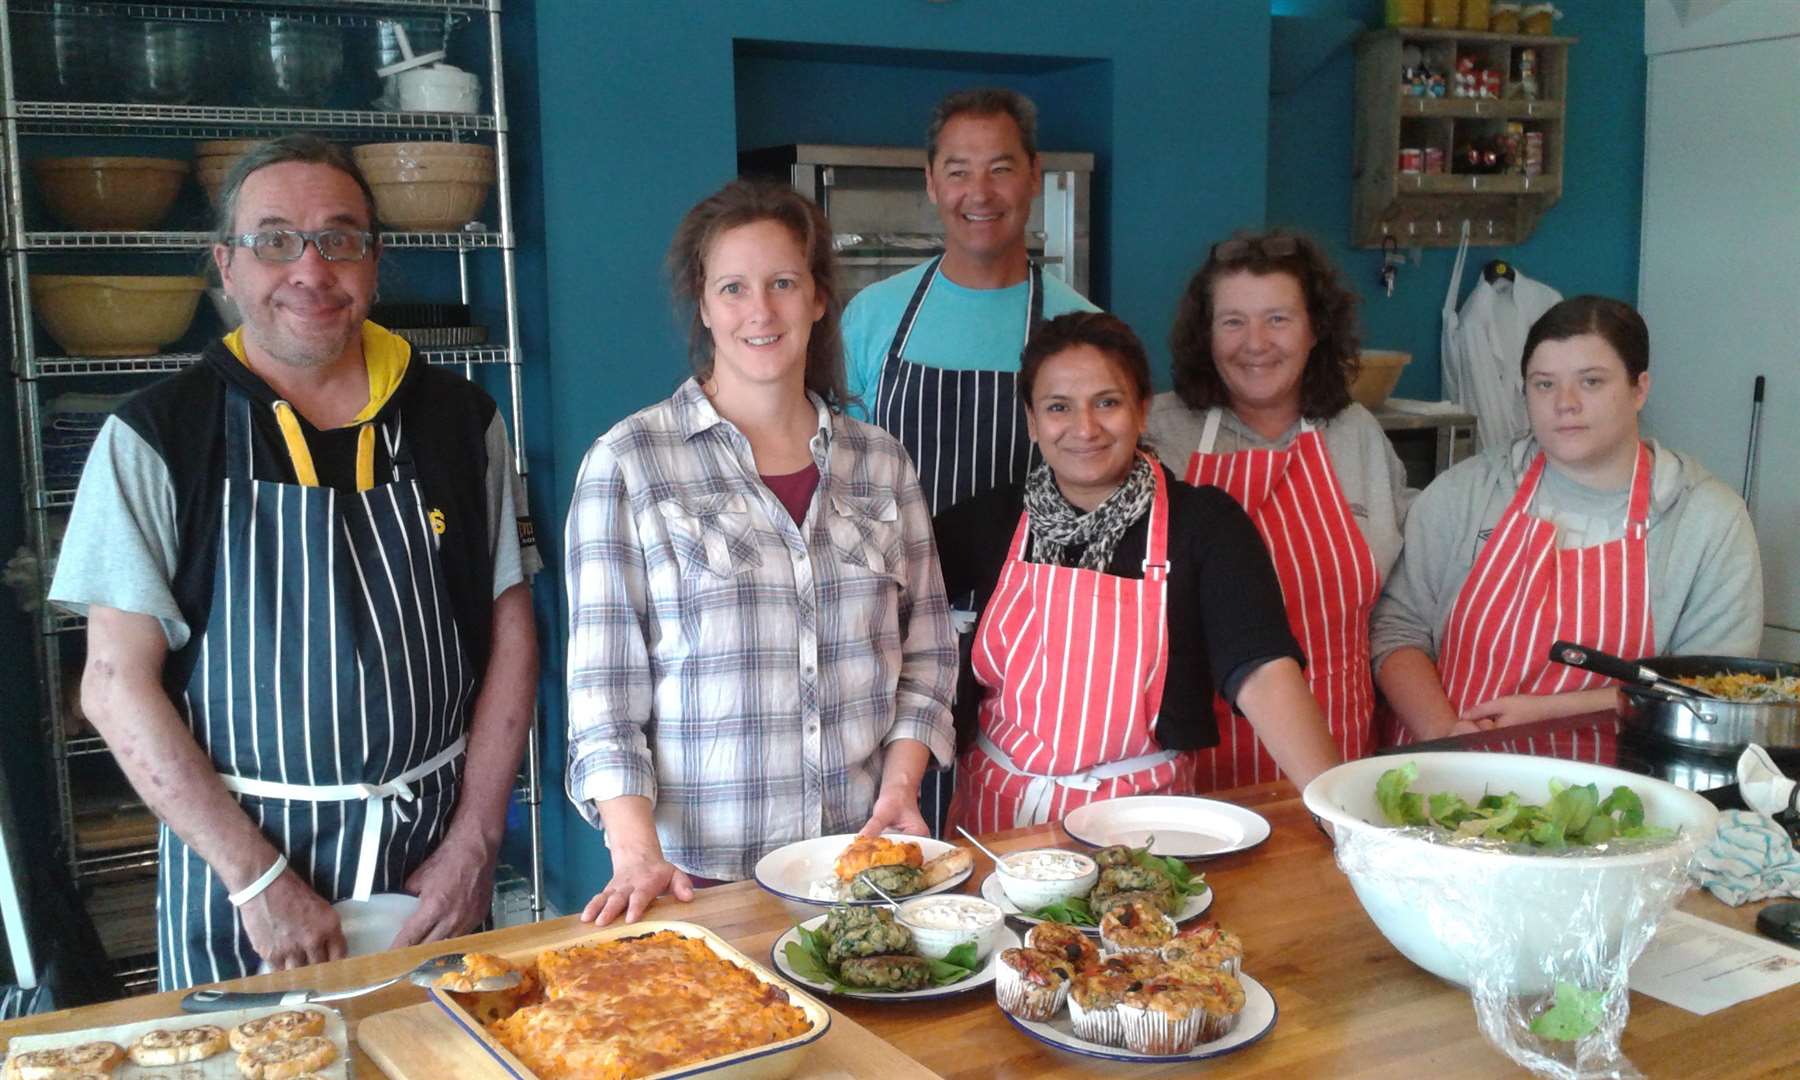 Chequers Community Kitchen wins top award